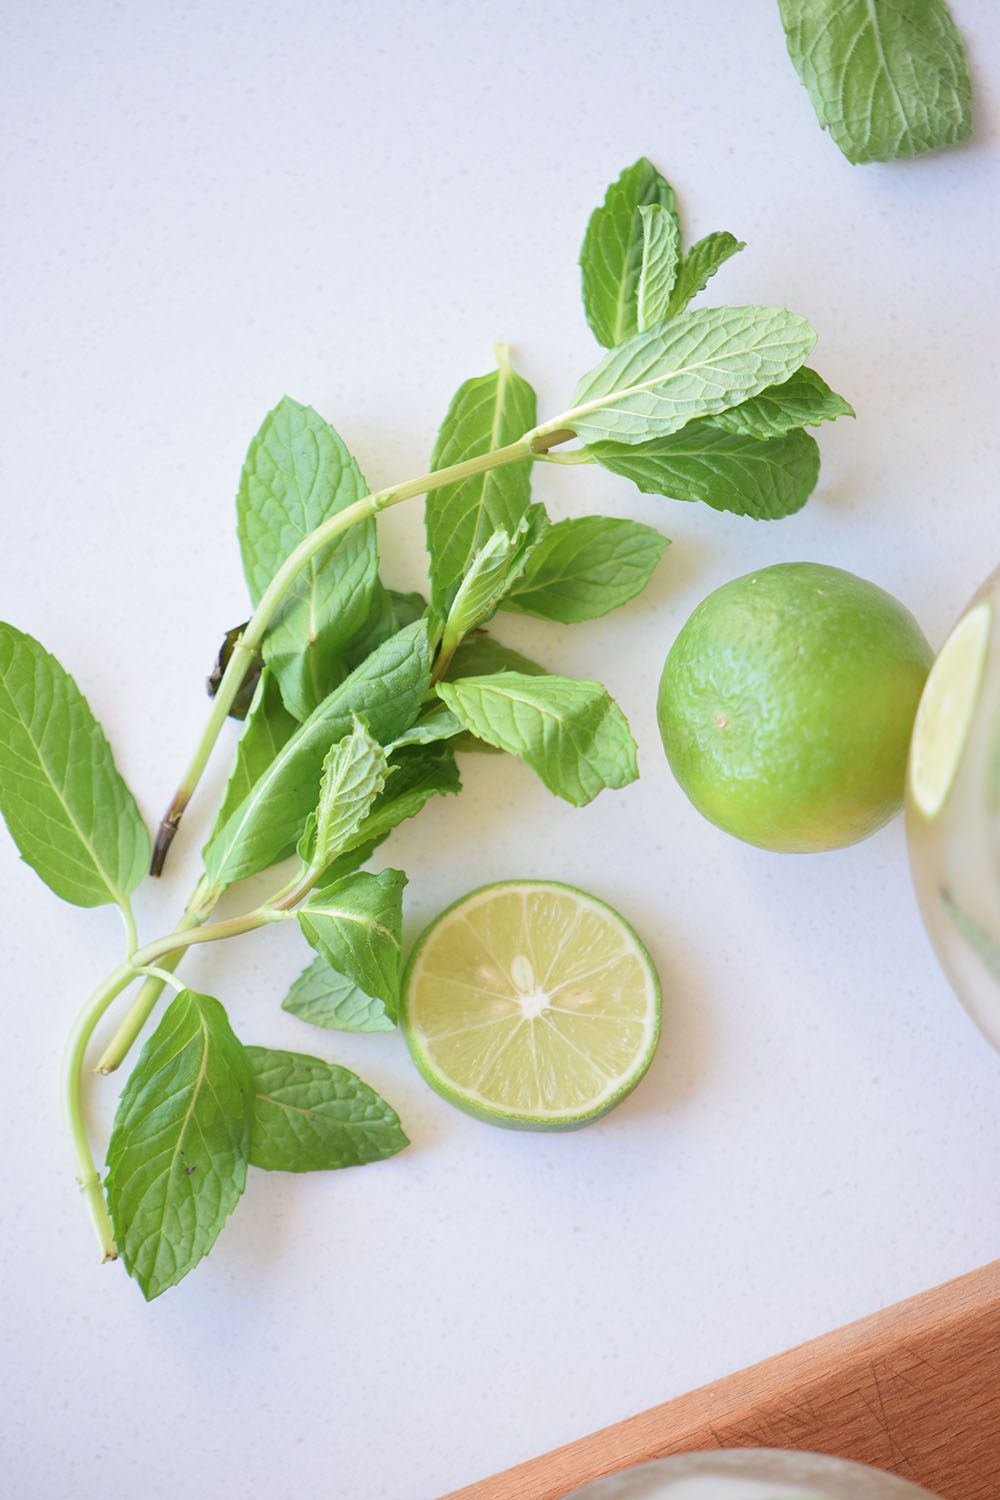 Easy Lime Mint Spritzer Recipe